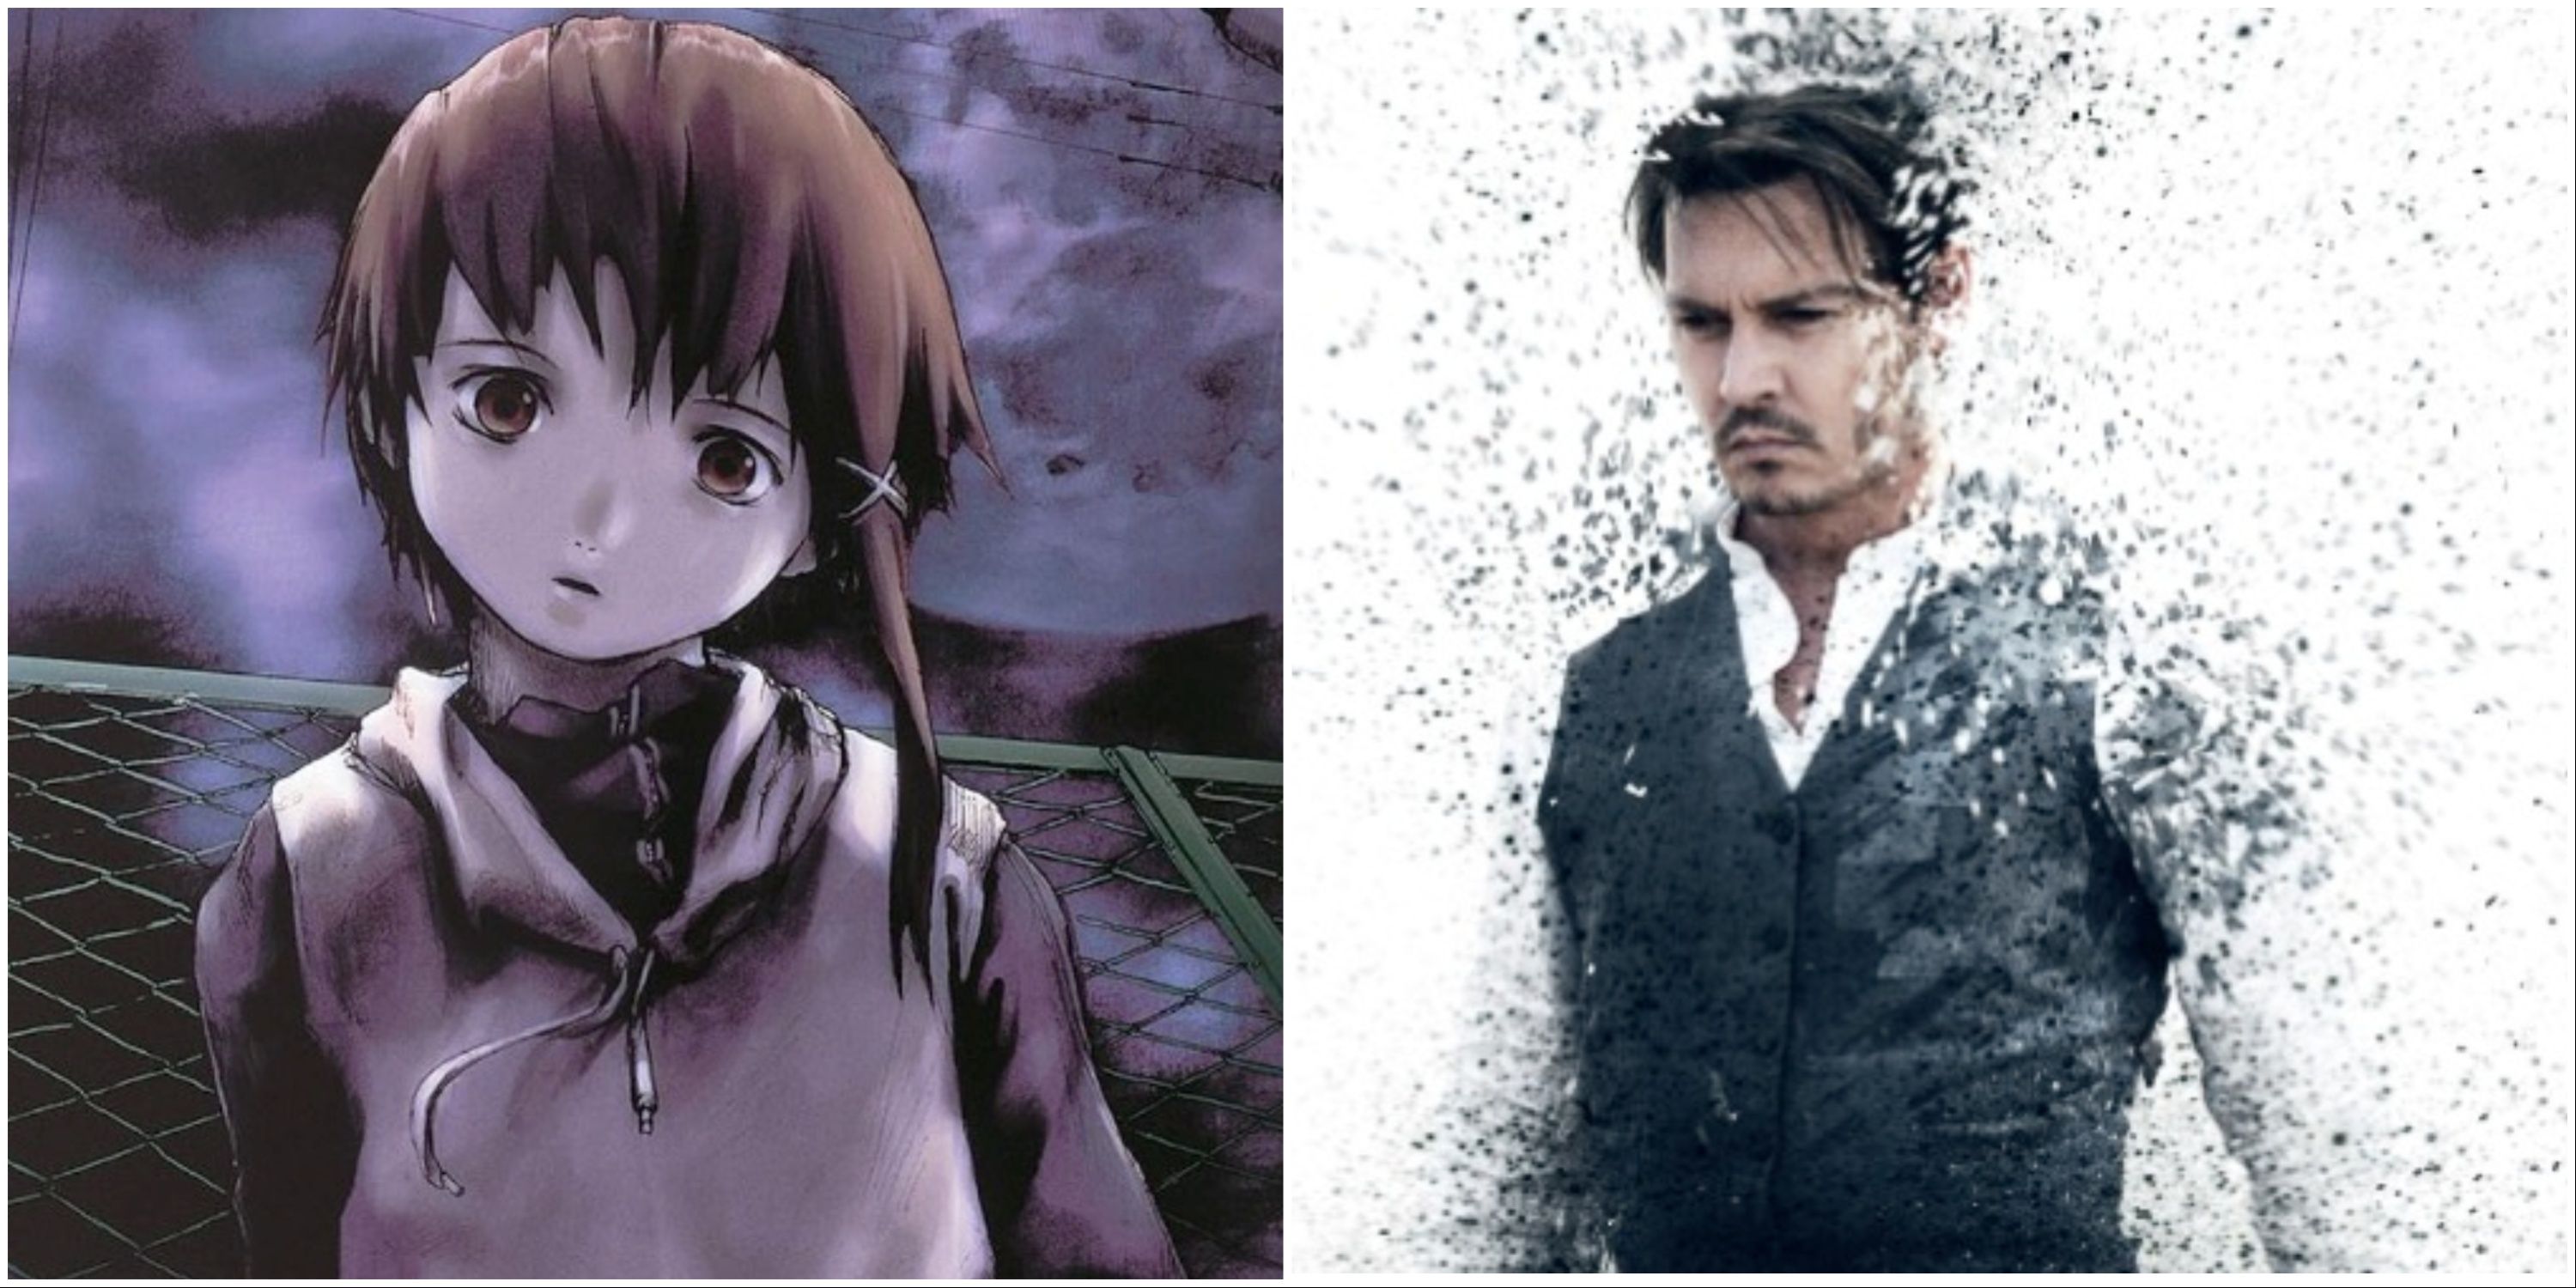 A split image showing the posters of Serial Experiments Lain and Transcendence